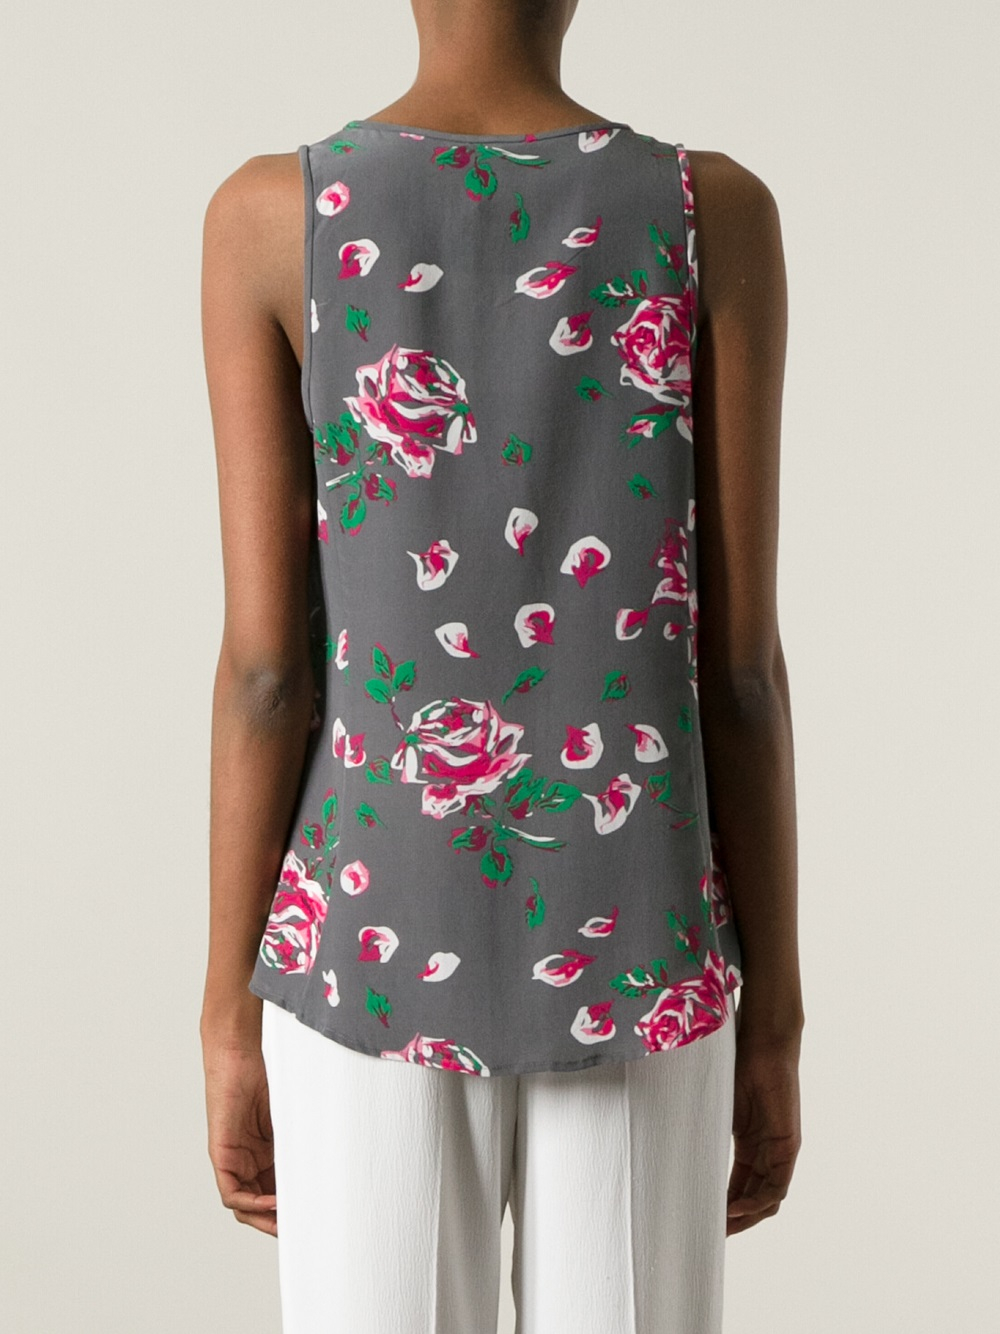 Lyst - Joie Floral Print Tank Top in Gray